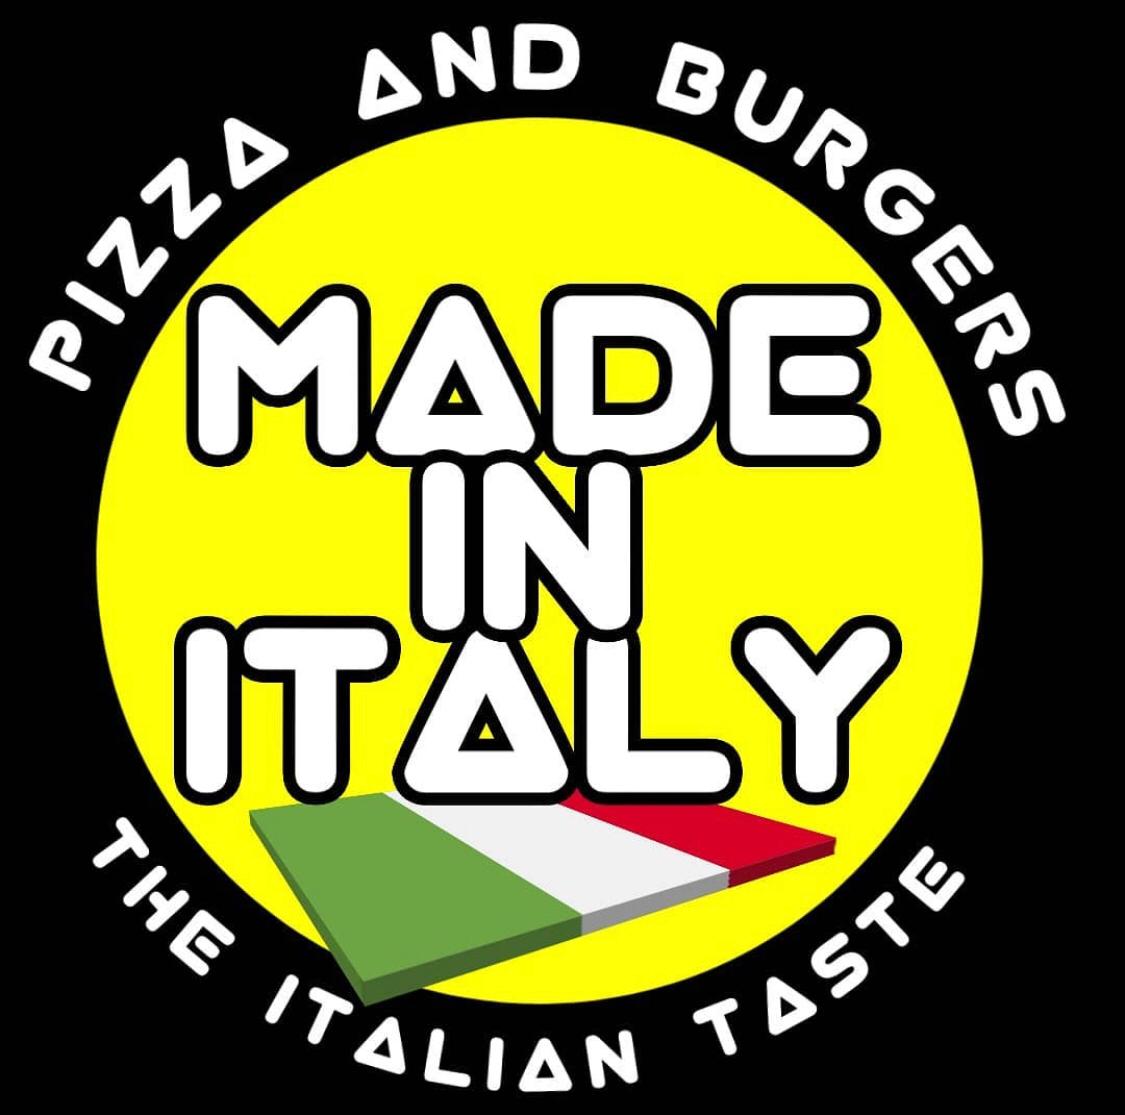  food truck “Made In Italy”